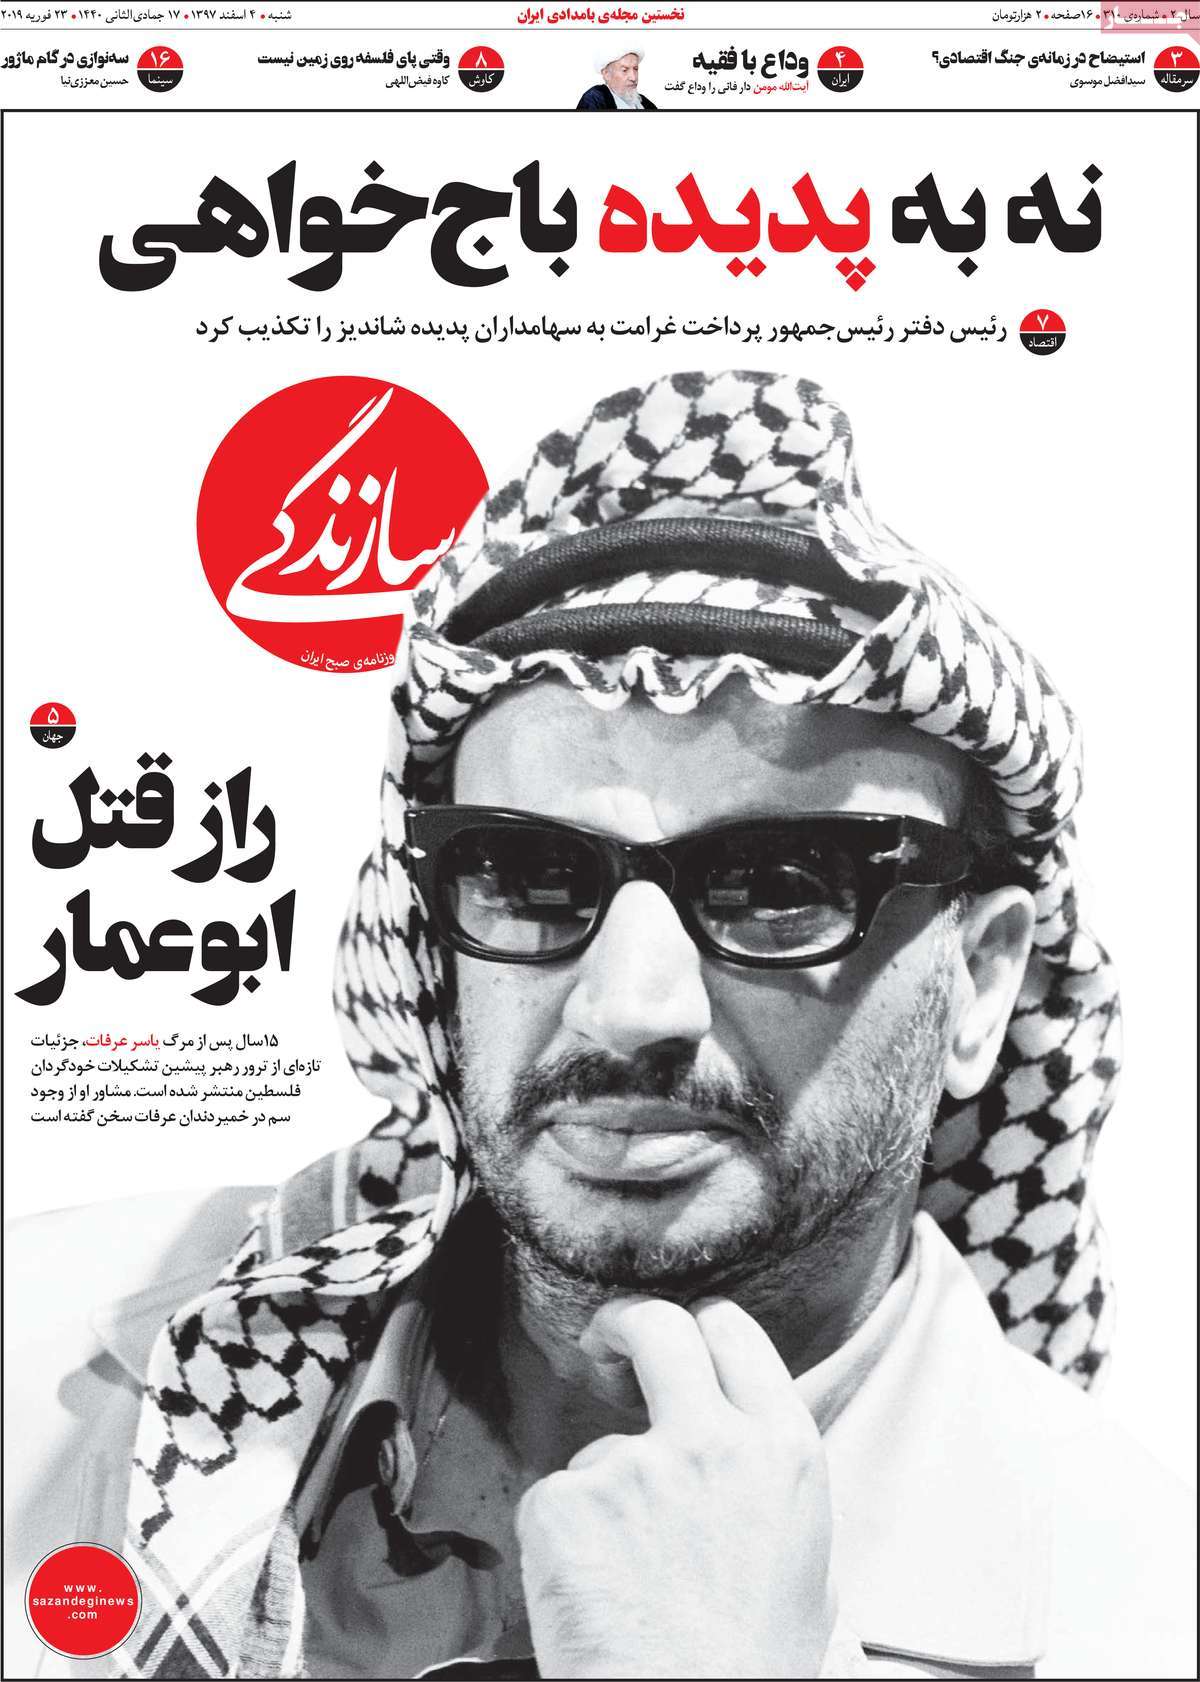 A Look at Iranian Newspaper Front Pages on February 23